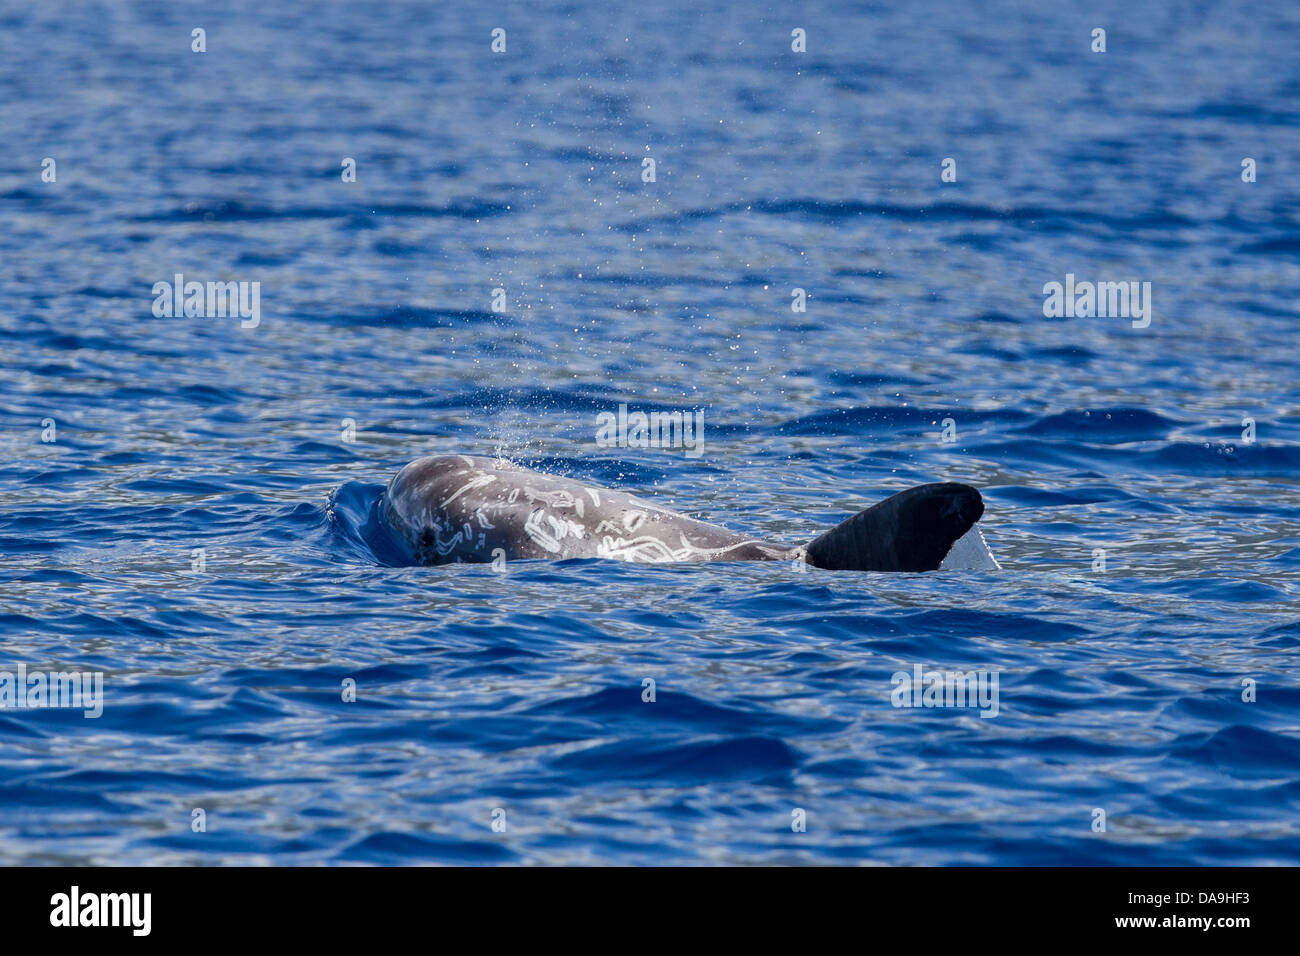 Risso`s Dolphin, Grampus griseus, Rundkopfdelphin, surfacing, blow and scars visible, Portugal, Azores, Pico, Stock Photo